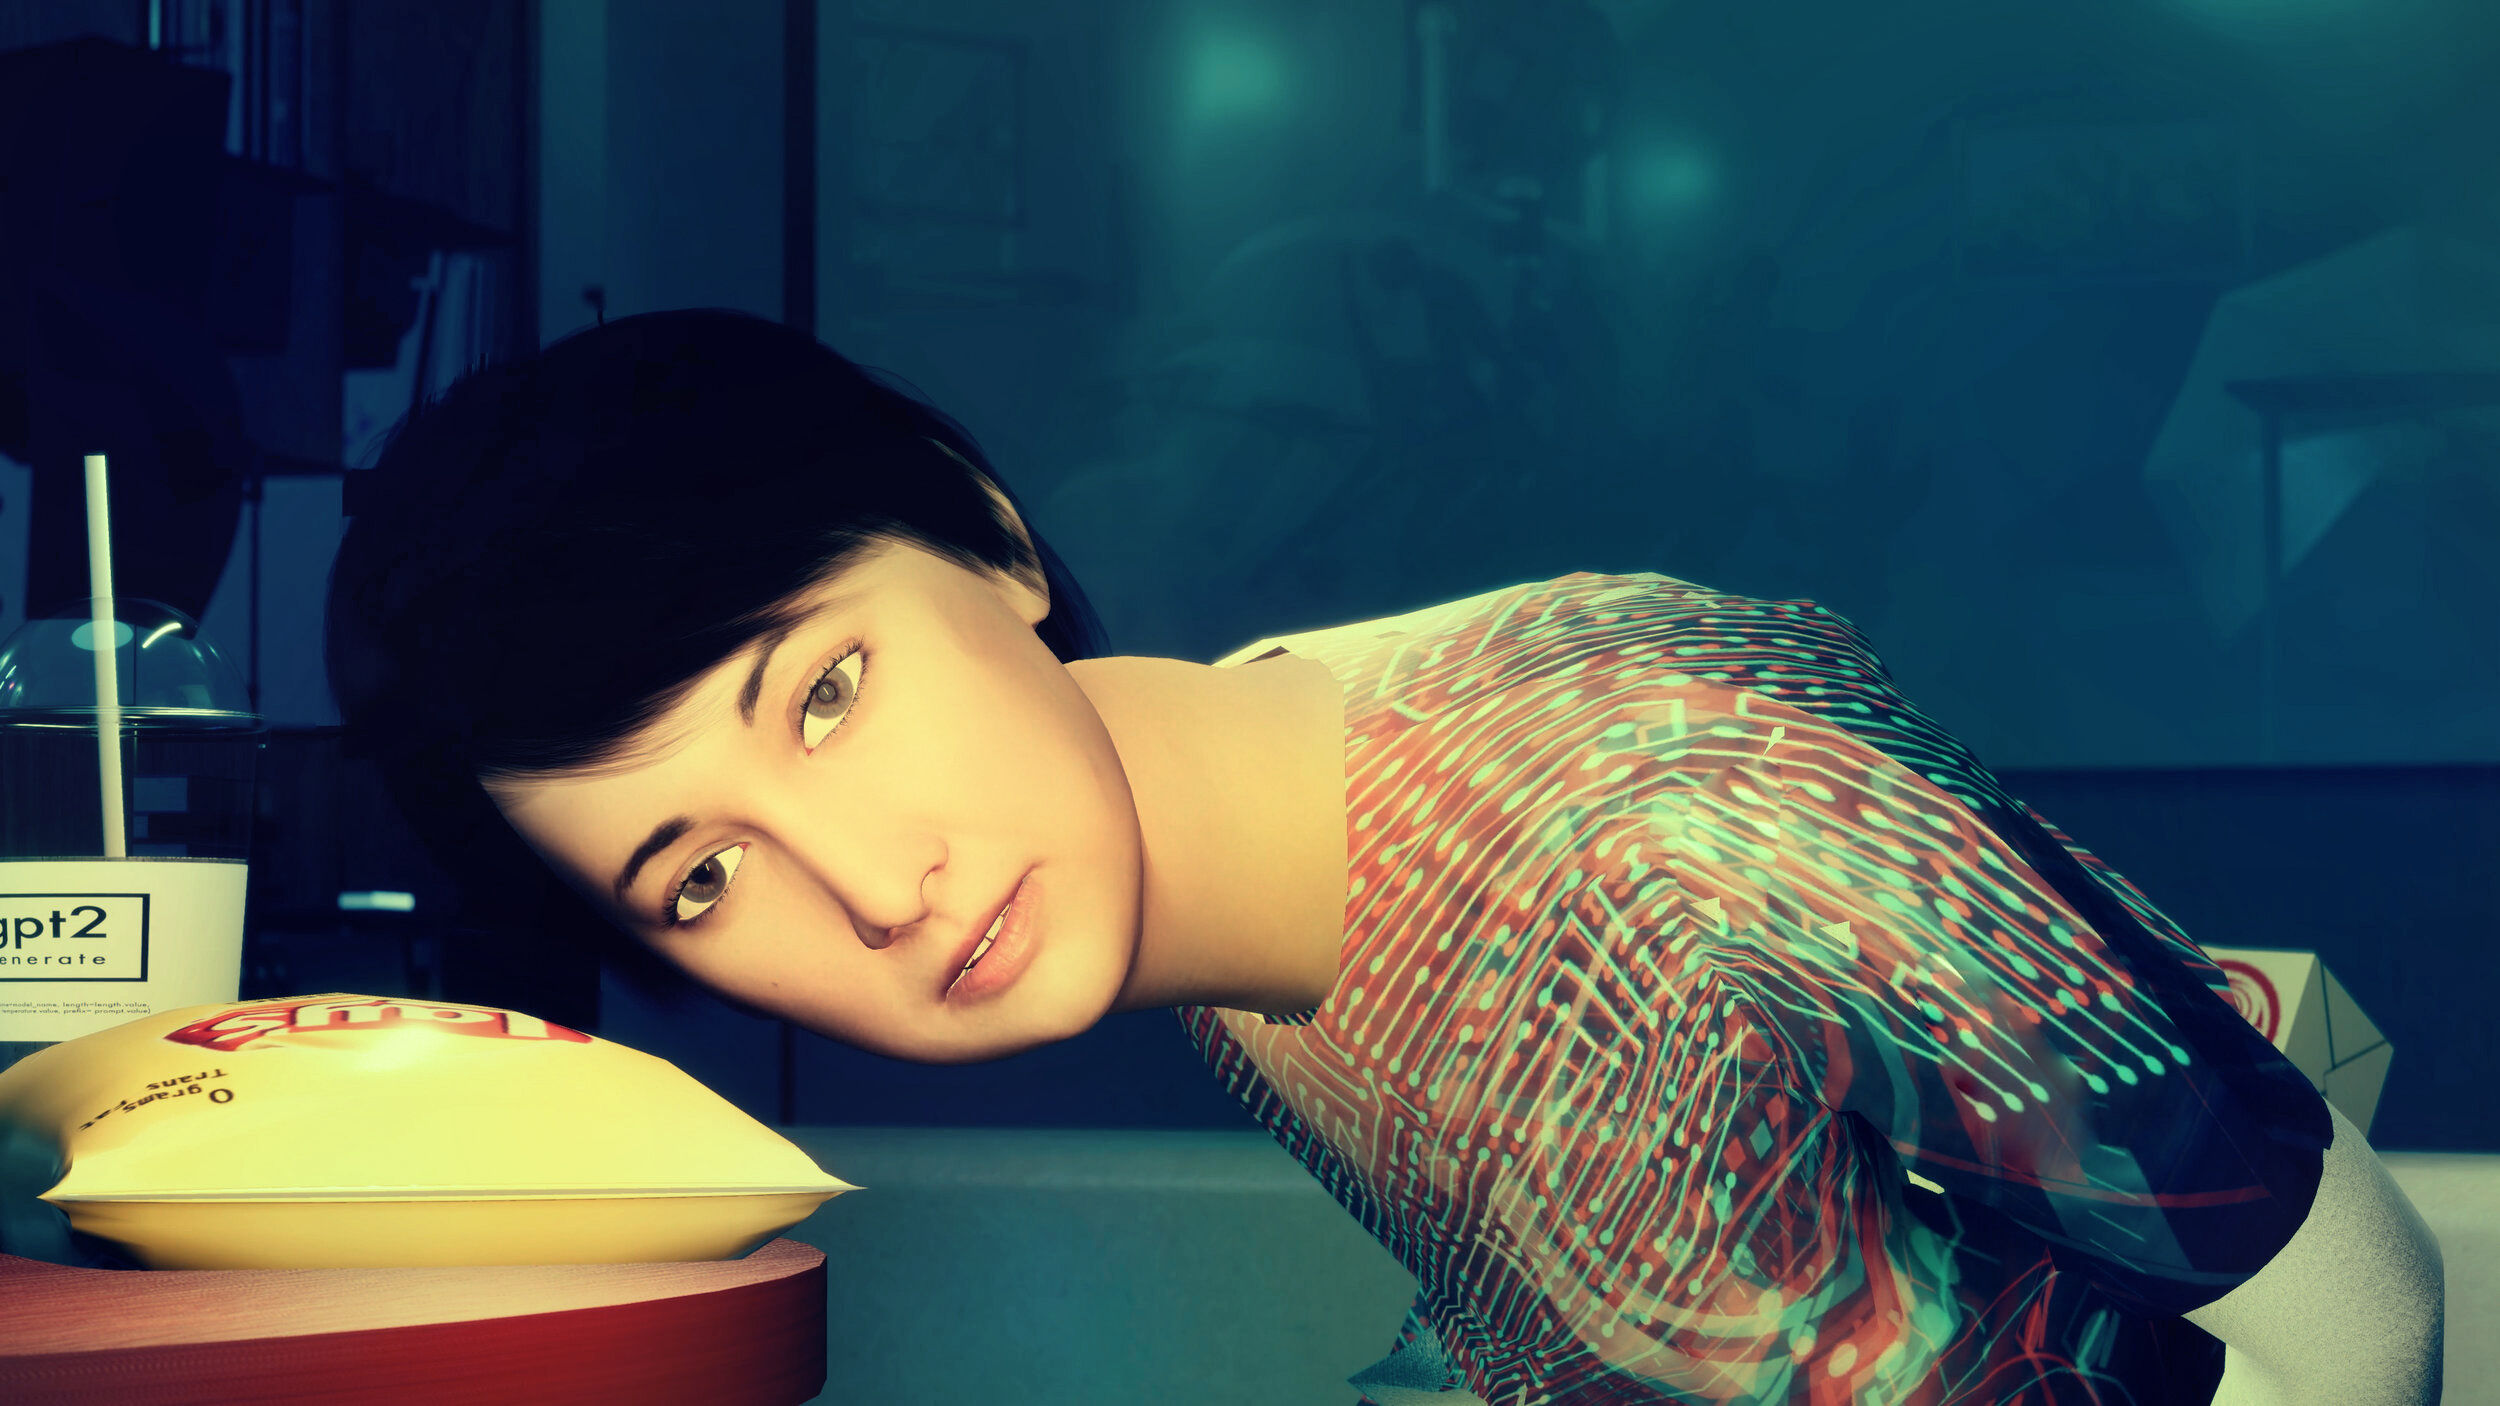 Animated image of a woman with short, black hair leaning her head against a yellow bag of Lay's chips in front of a blue background.